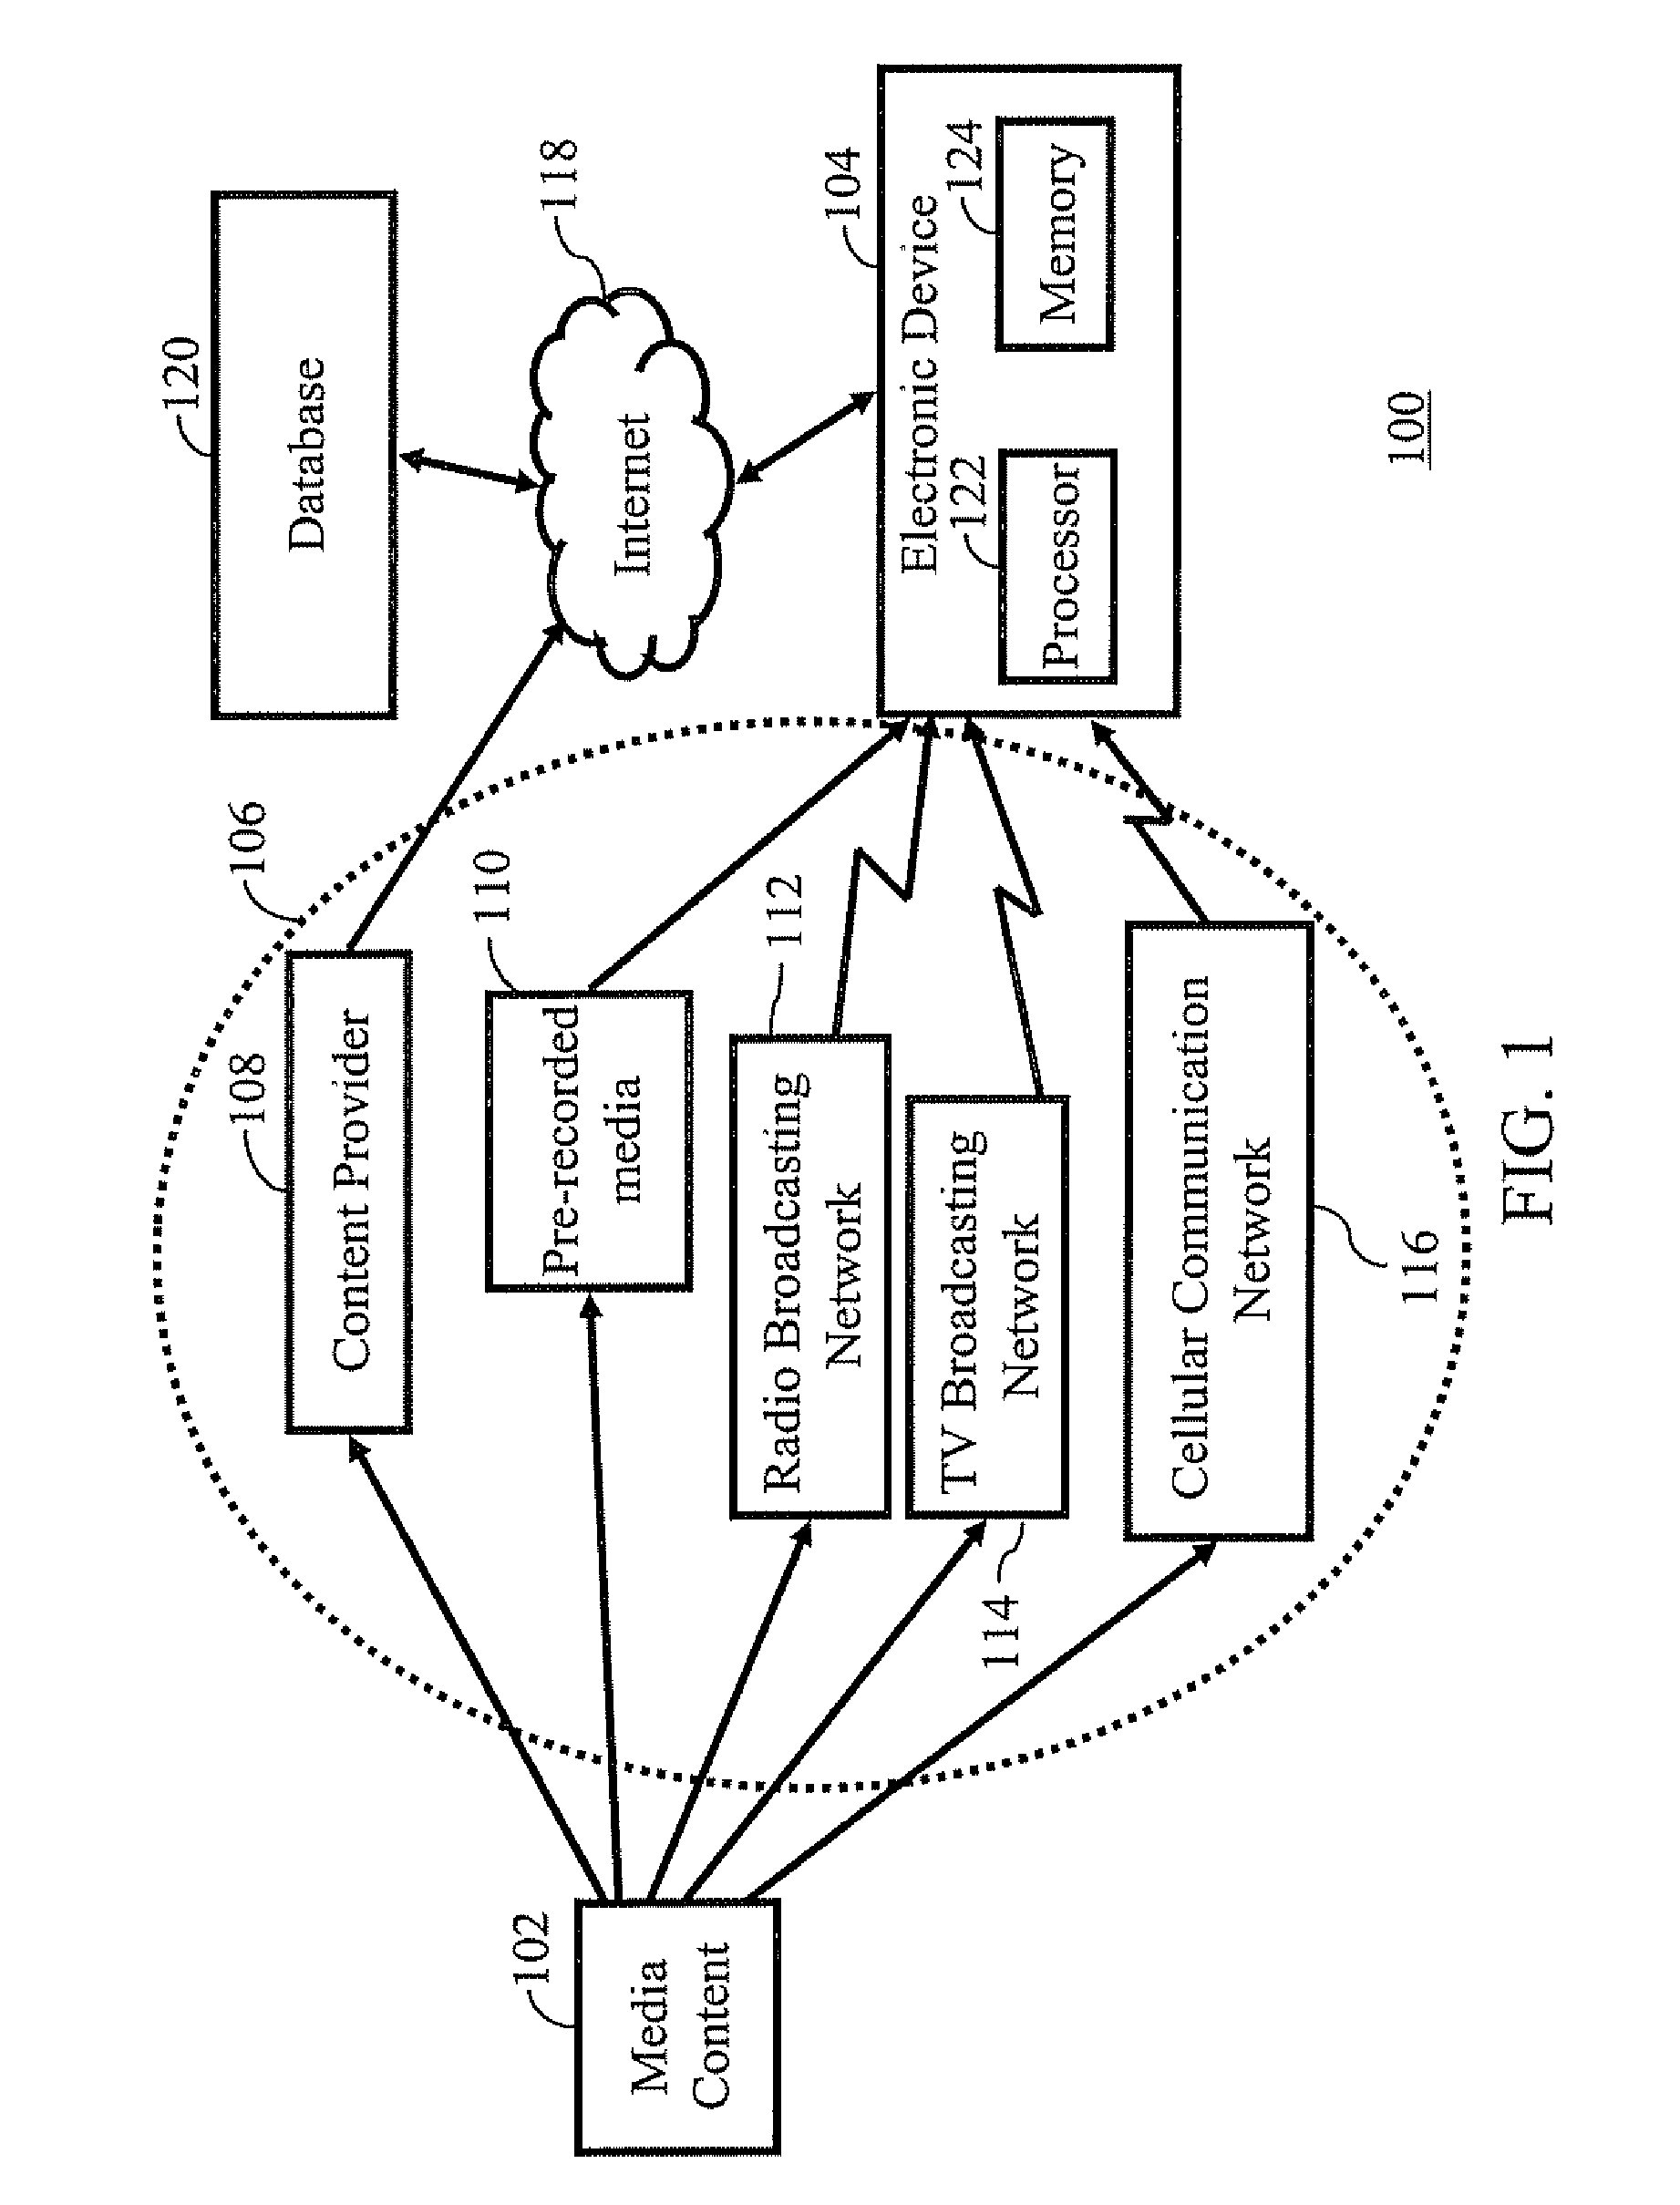 Method and System for Acquiring Information on the Basis of Media Content